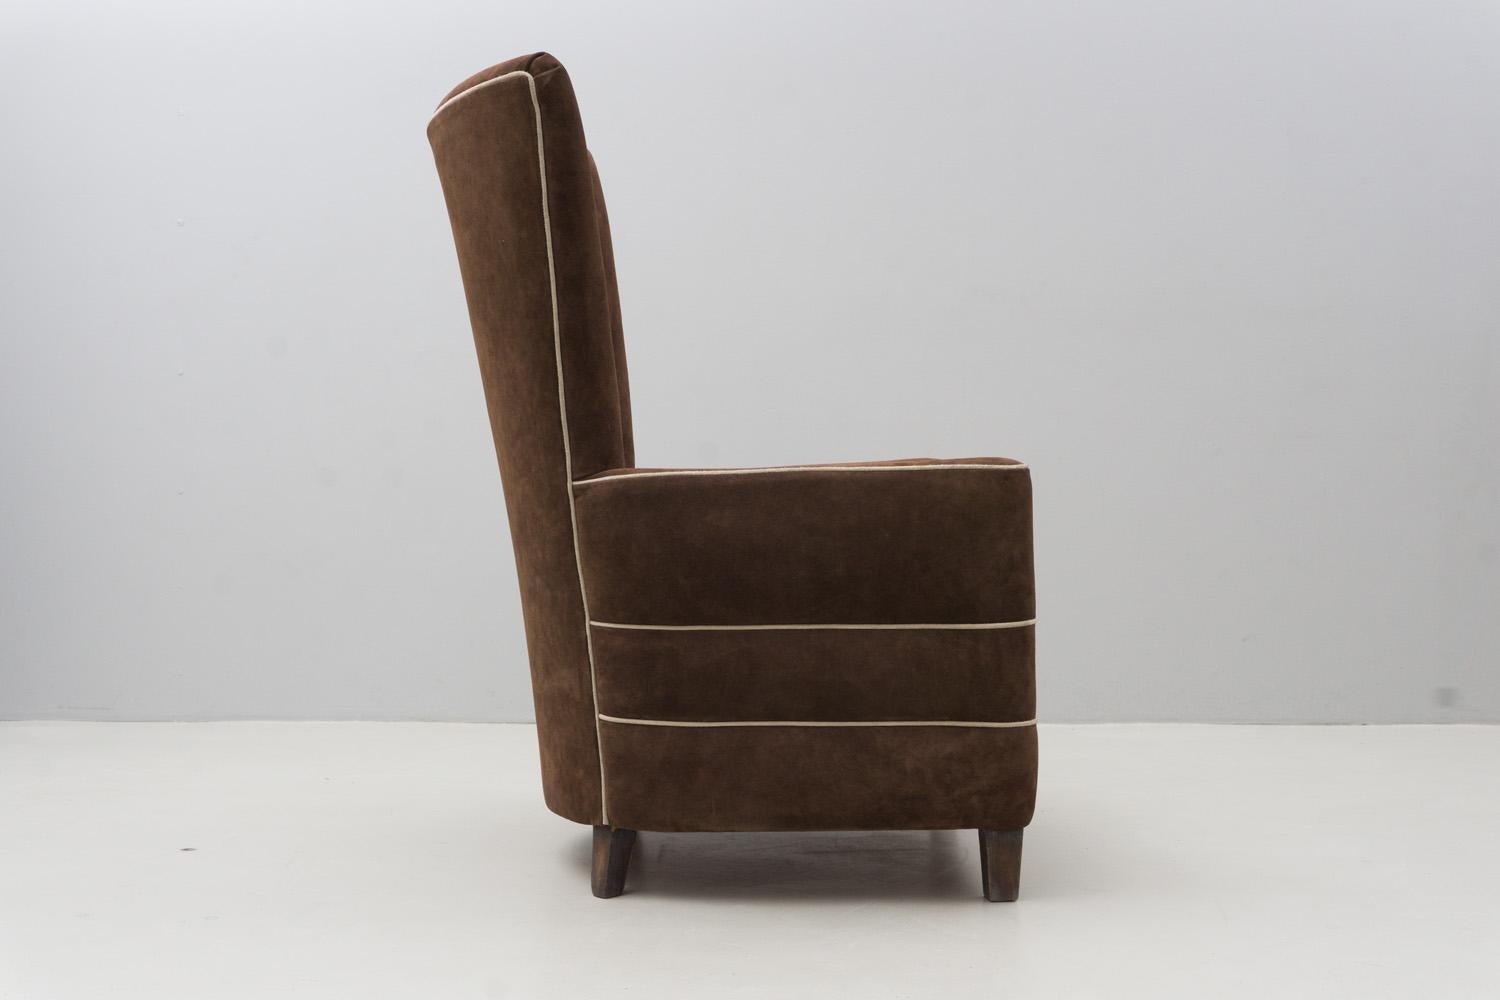 Pair of Brown Suede Armchairs, Guglielmo Ulrich, 1936 For Sale 1